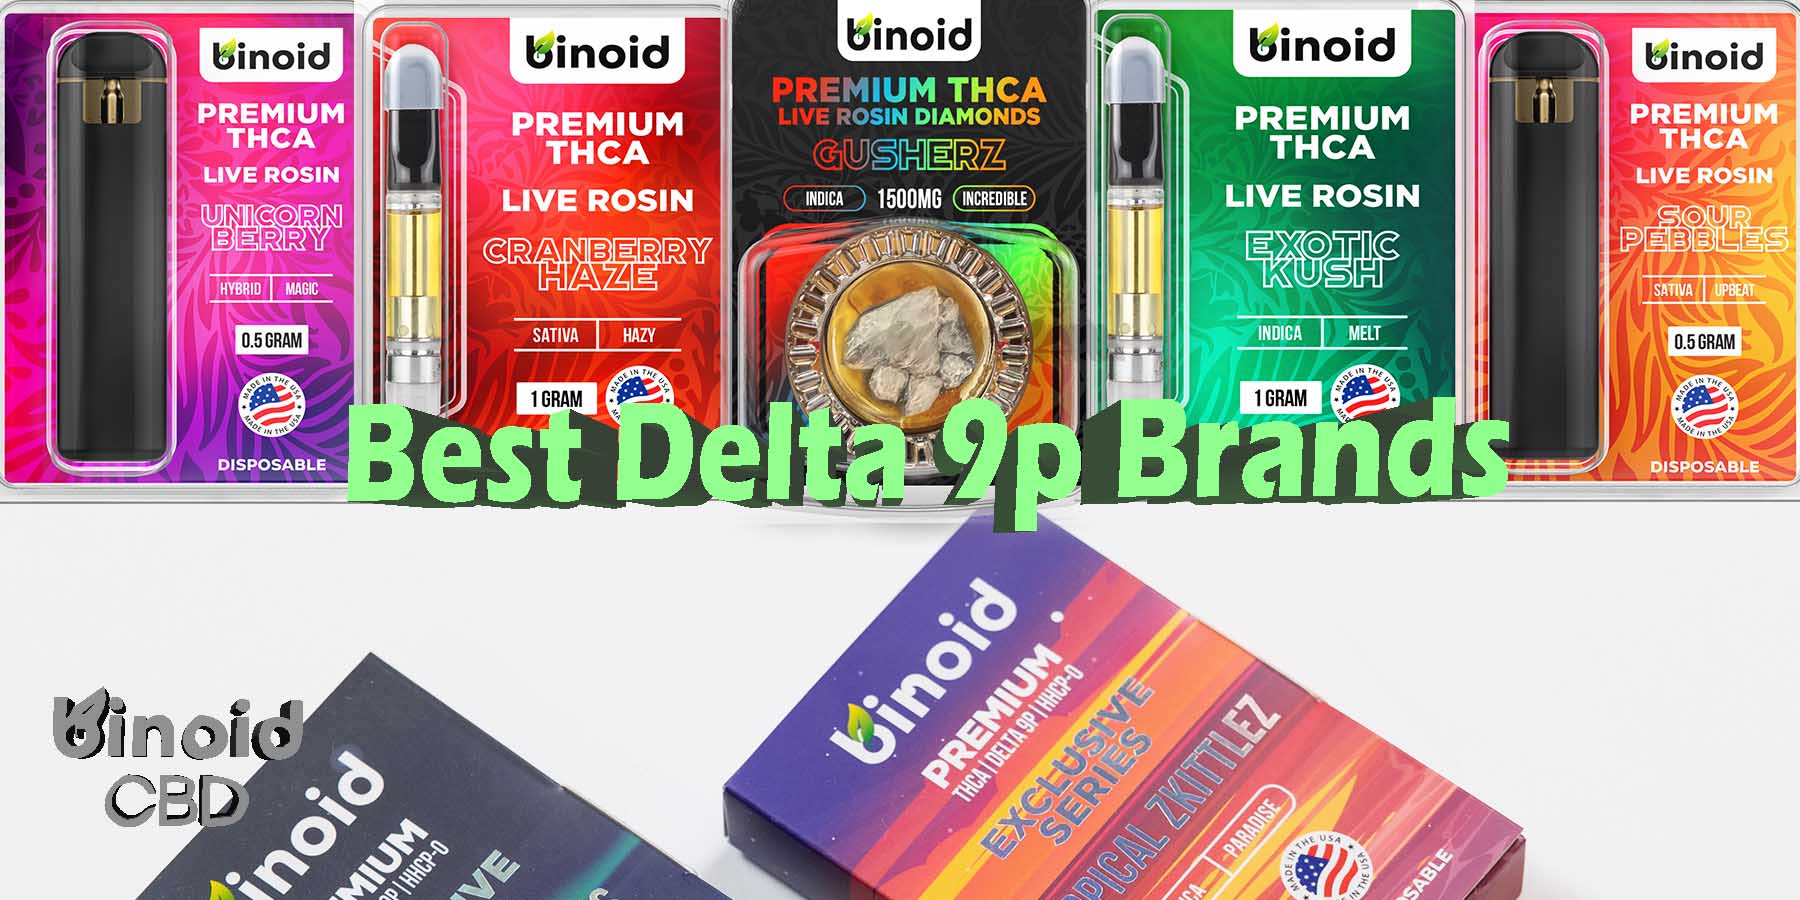 Best Delta 9p Brands Review Gram Review Take Work Online Best Brand Price Get Near Me Lowest Coupon Discount Store Shop Vapes Carts Online Strong